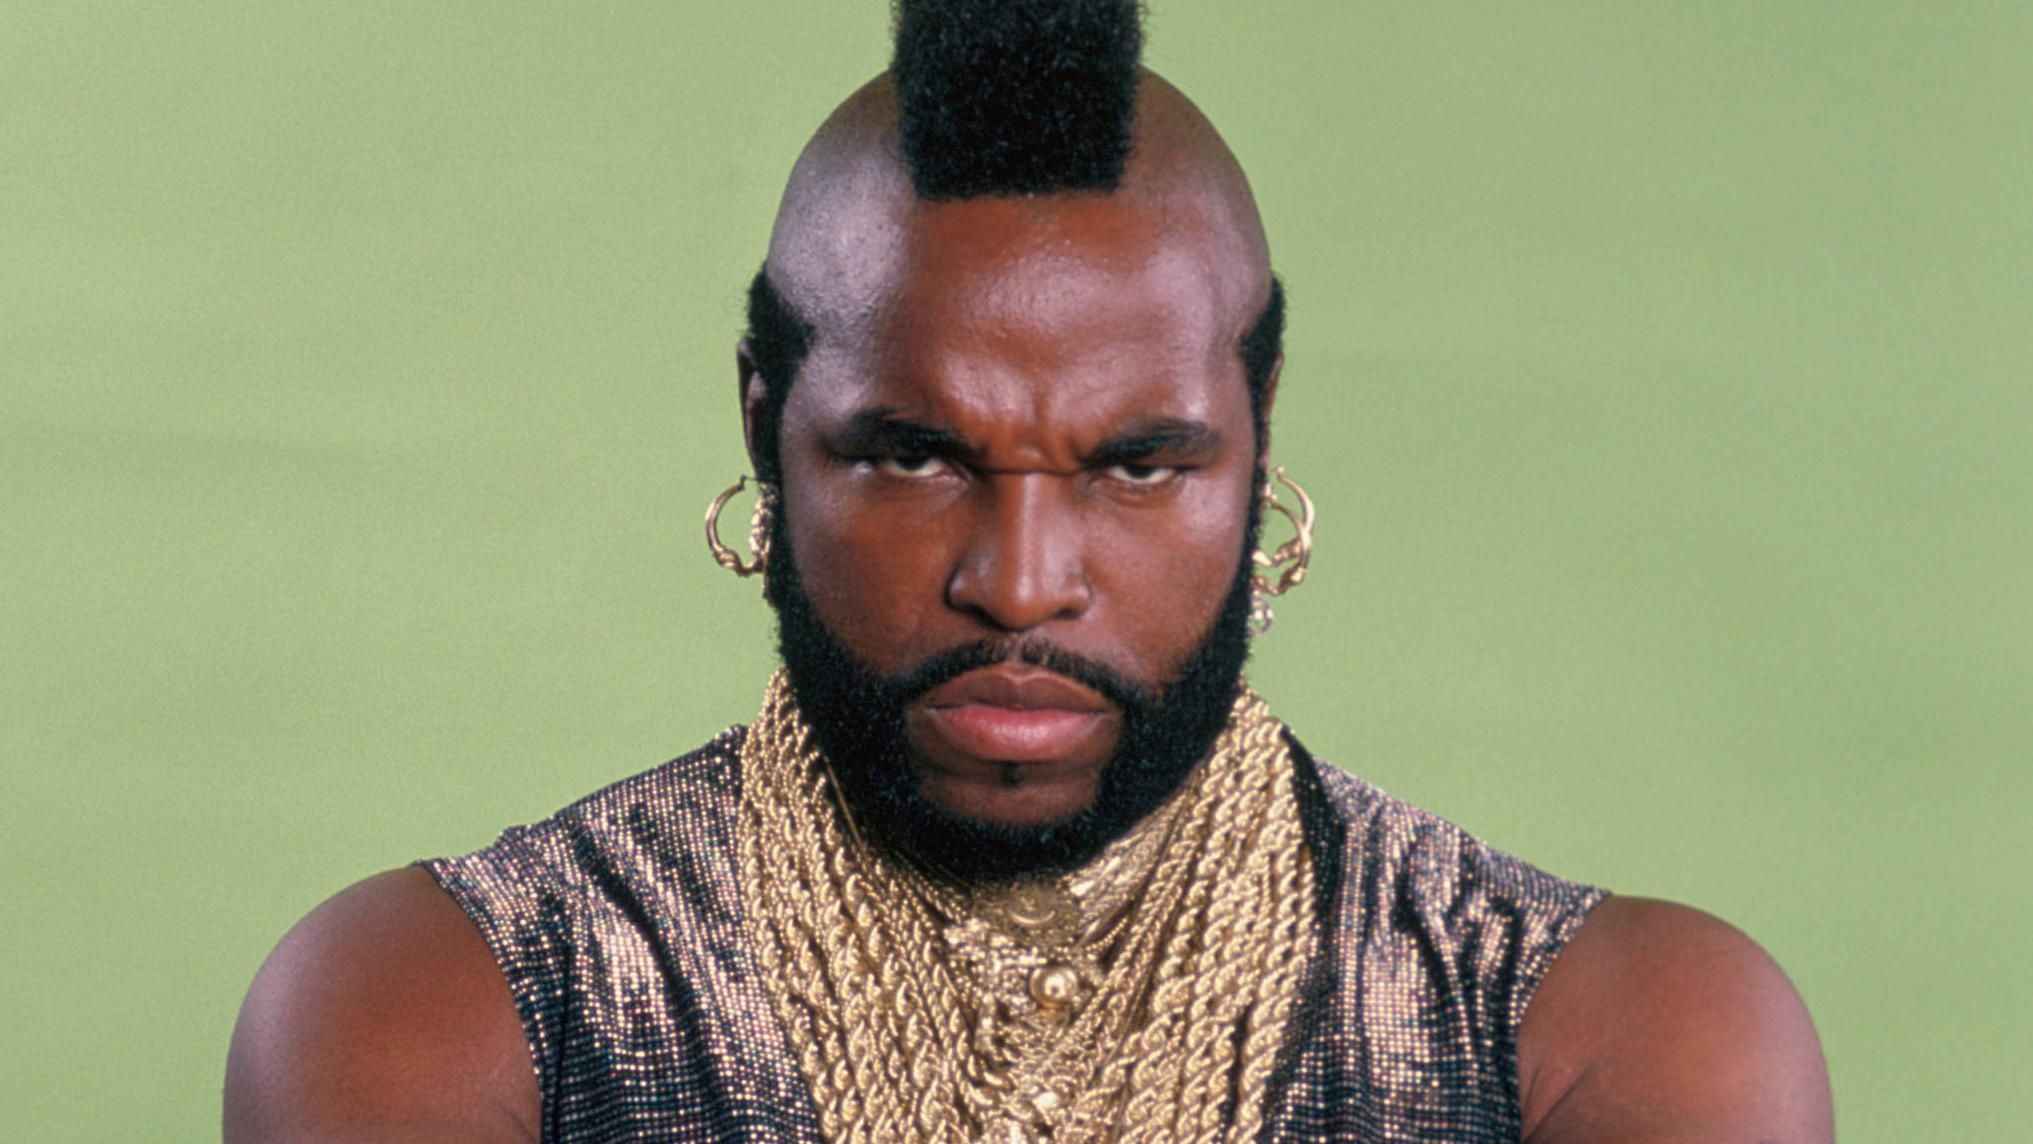 TV-legendes onthuld | Zei meneer T nooit 'I Pity the Fool' in 'The A-Team'?